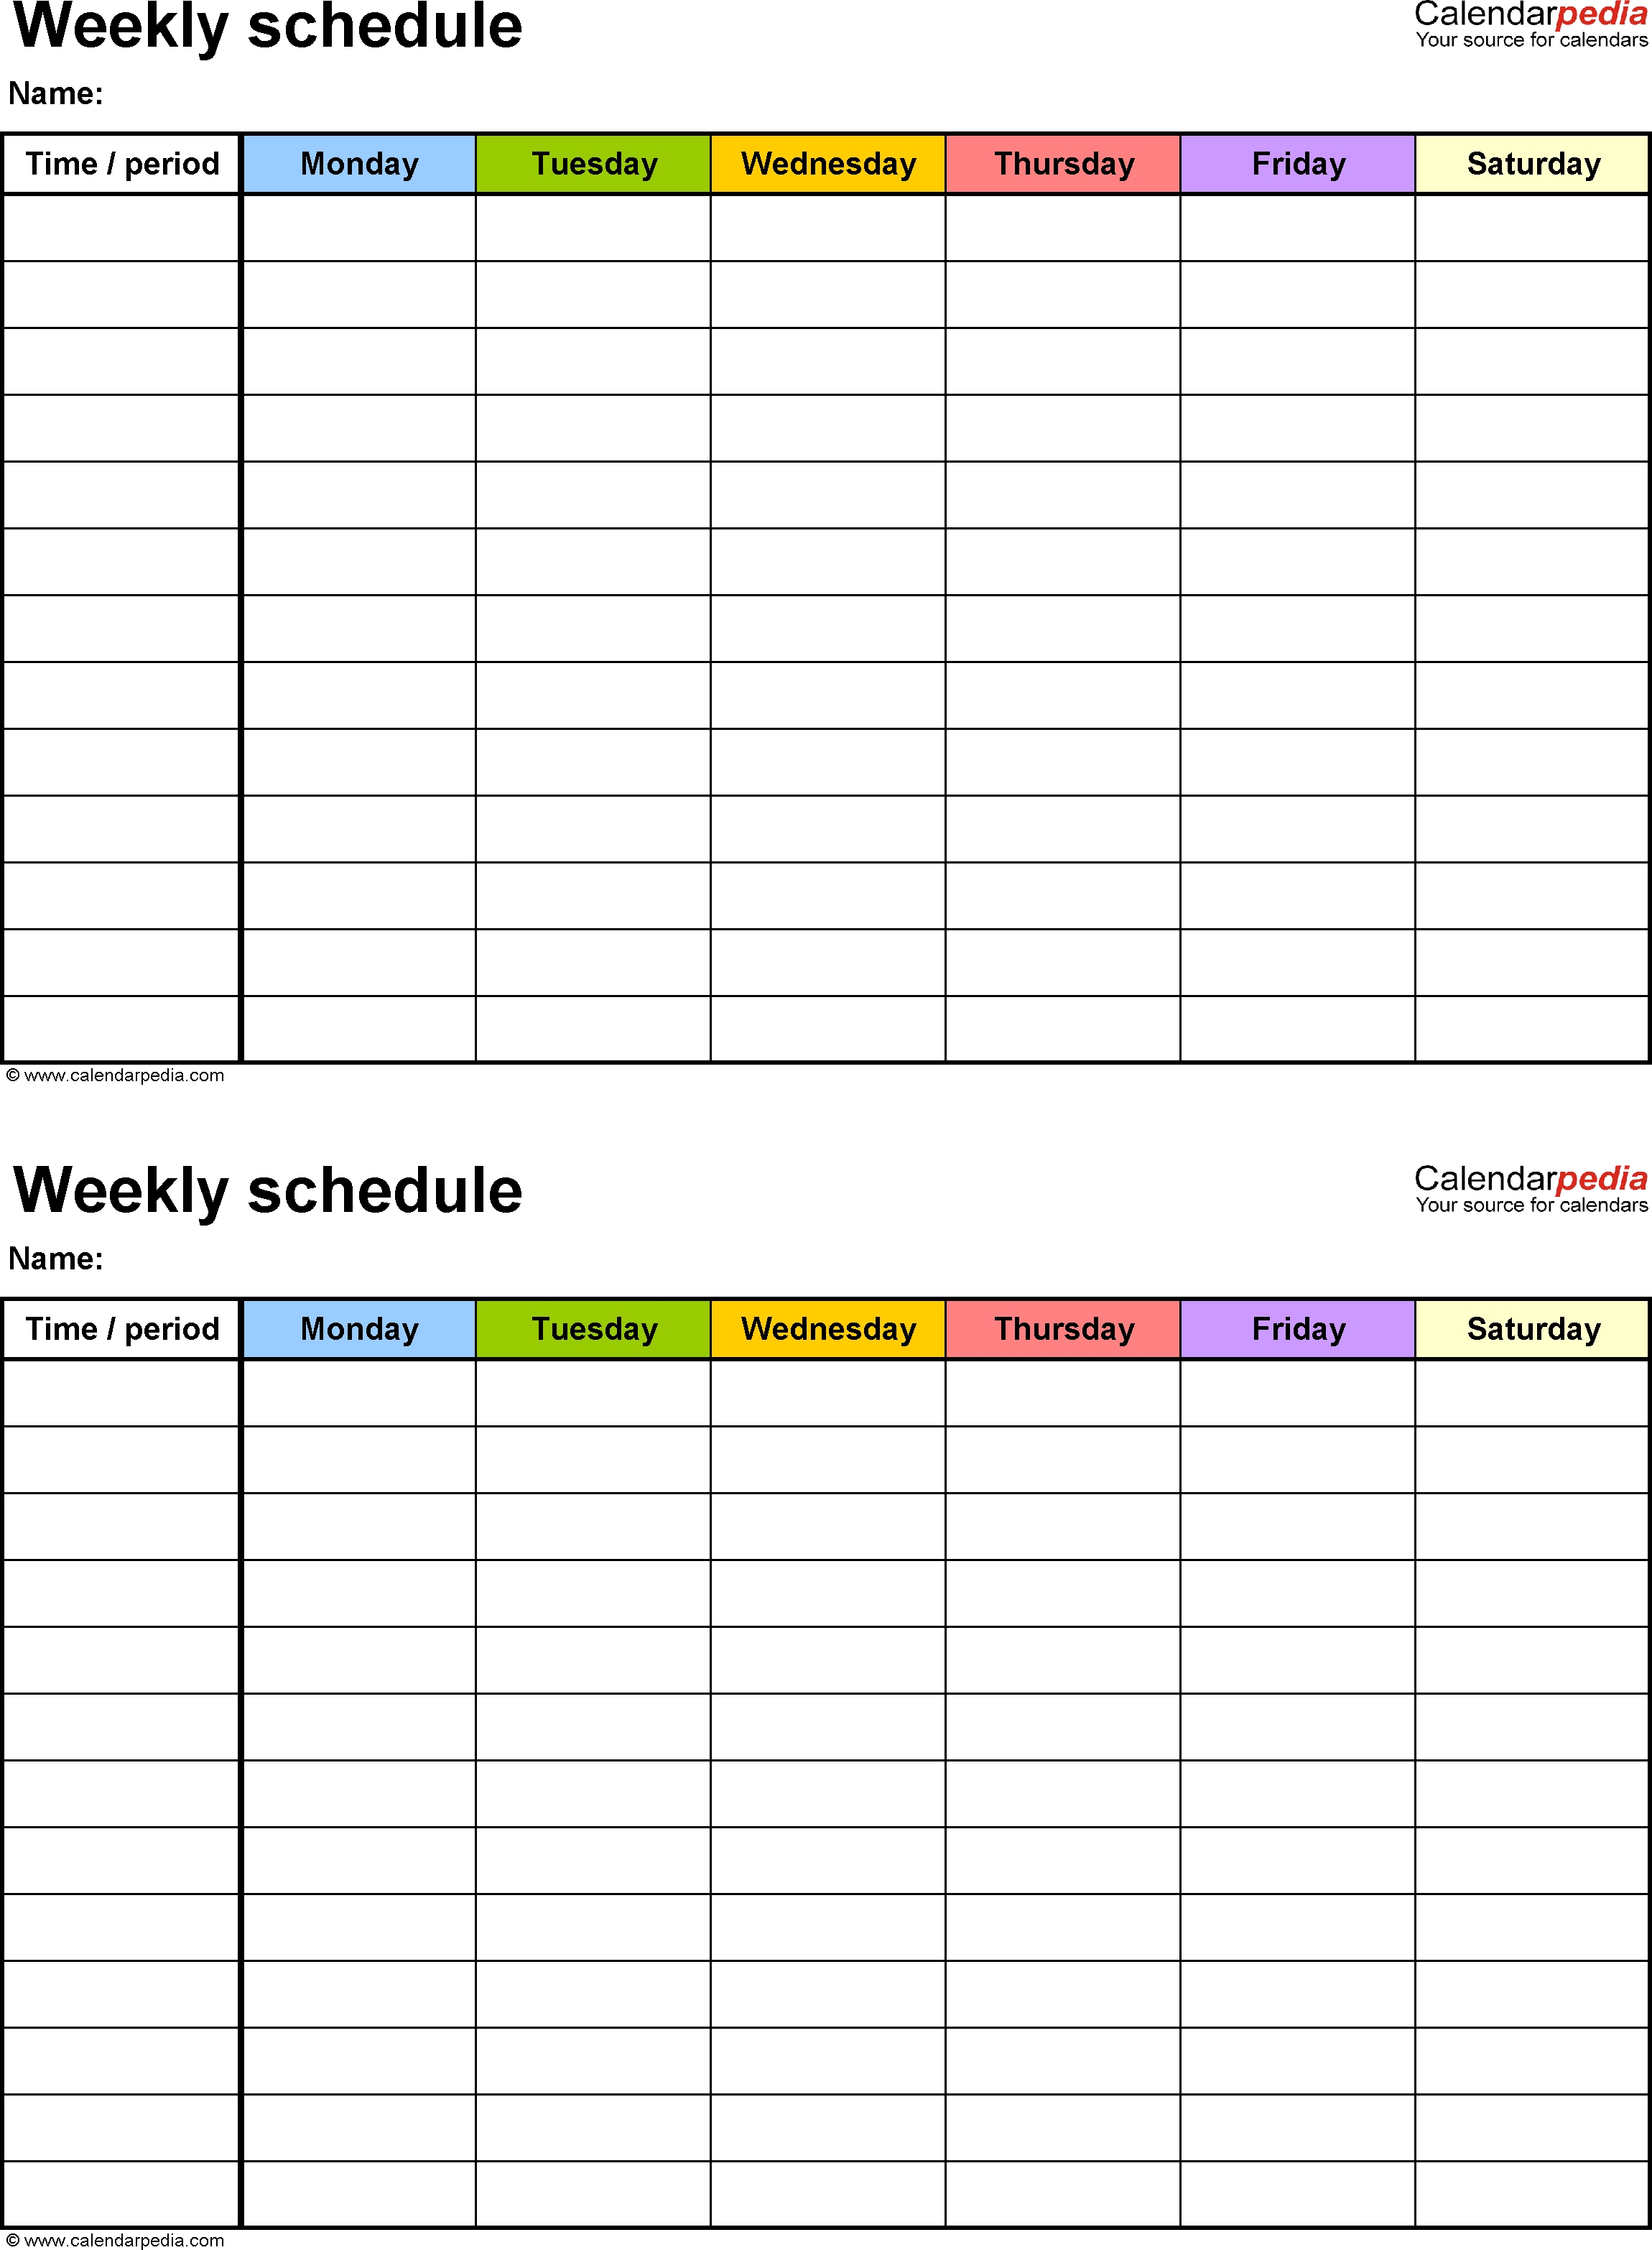 Free Weekly Schedule Templates For Word - 18 Templates for Free One Week Schedule Template